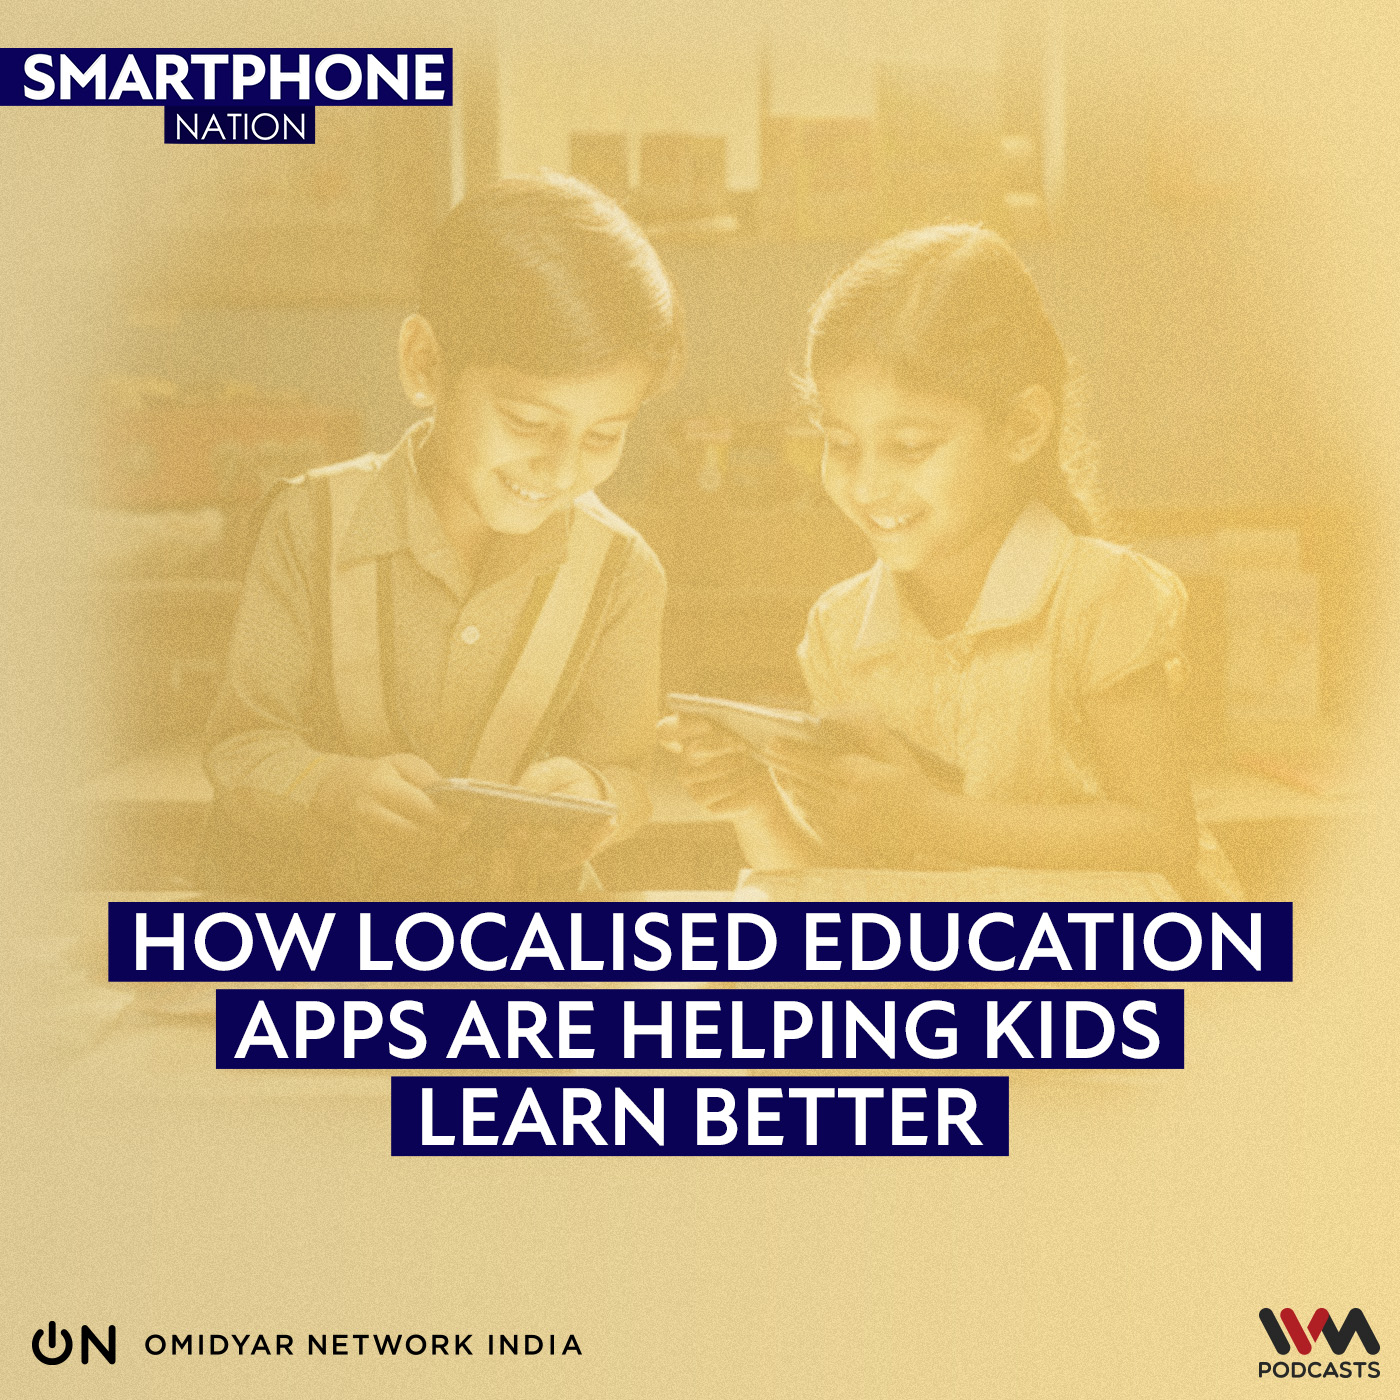 How Localised Education Apps are Helping Kids Learn Better